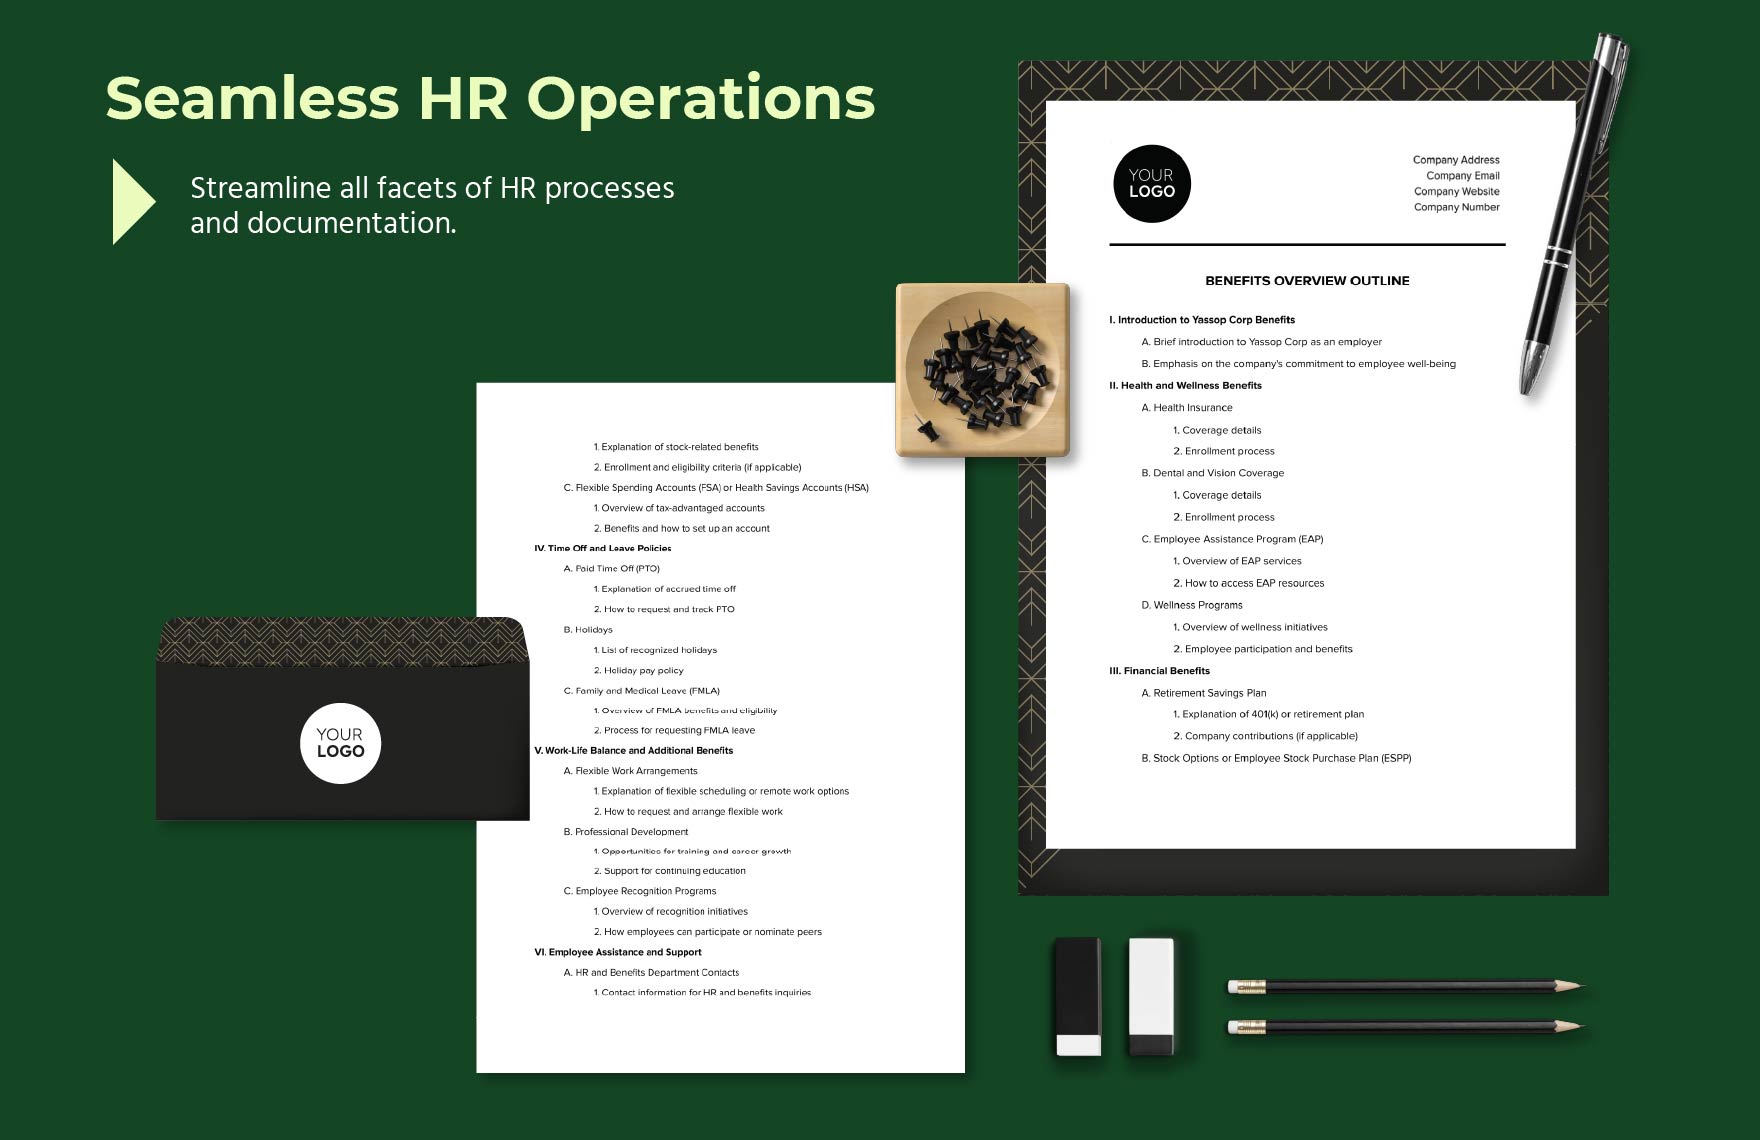 Benefits Overview Outline HR Template